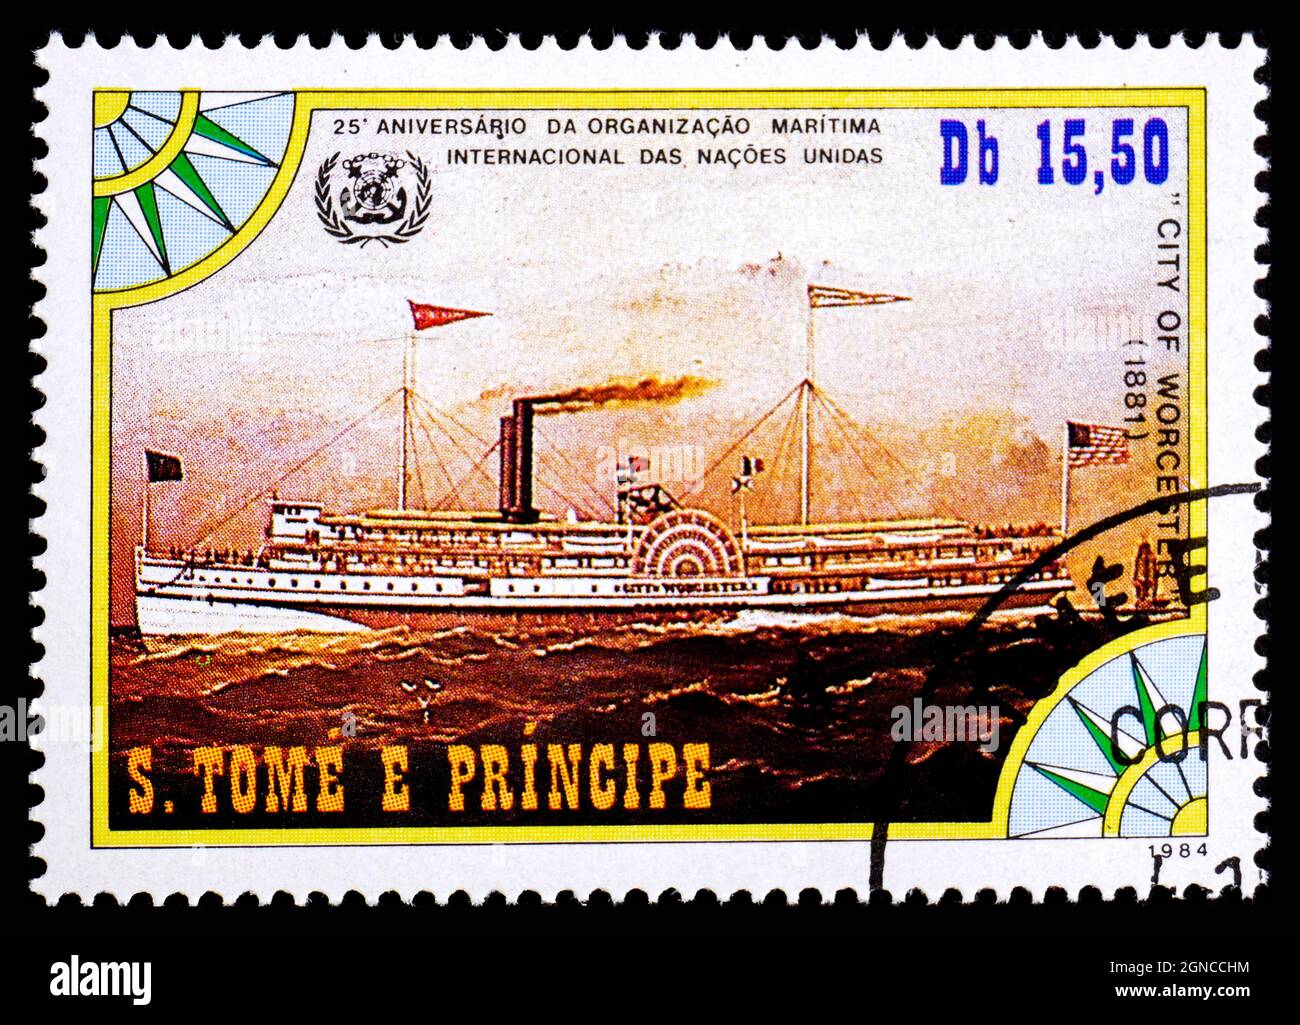 ST. THOMAS AND PRINCE ISLANDS - CIRCA 1984: A stamp printed in Sao Tome and Principe shows old passenger steam ship City of Worcester 1881 Stock Photo